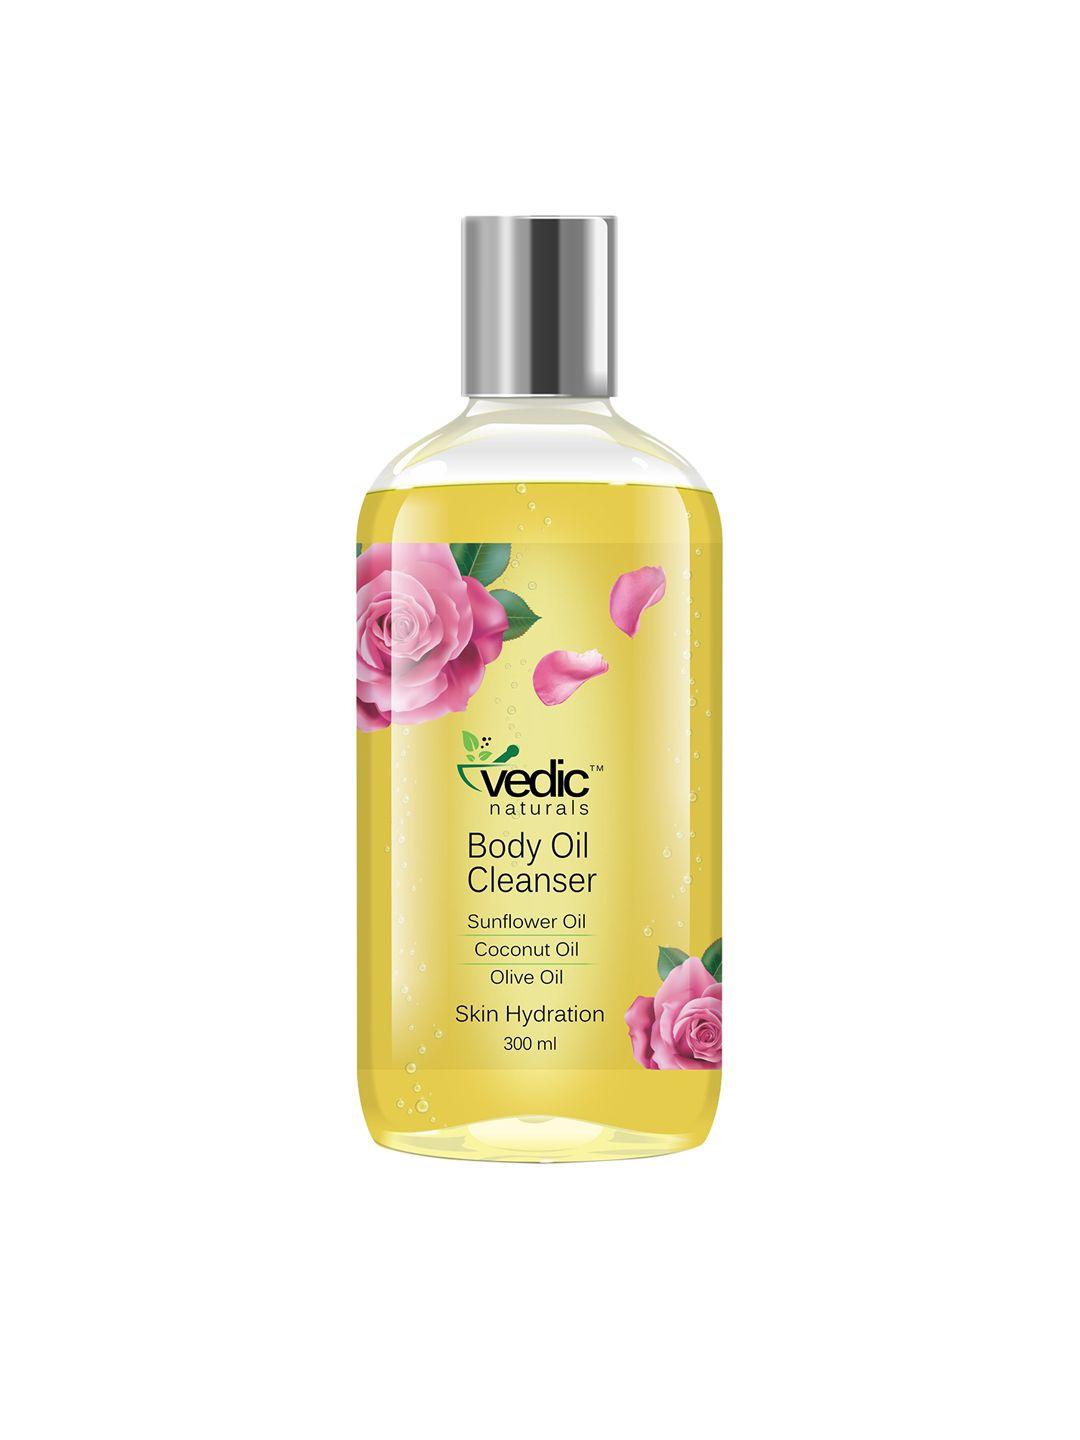 vedic naturals body oil cleanser for skin hydration - 300ml